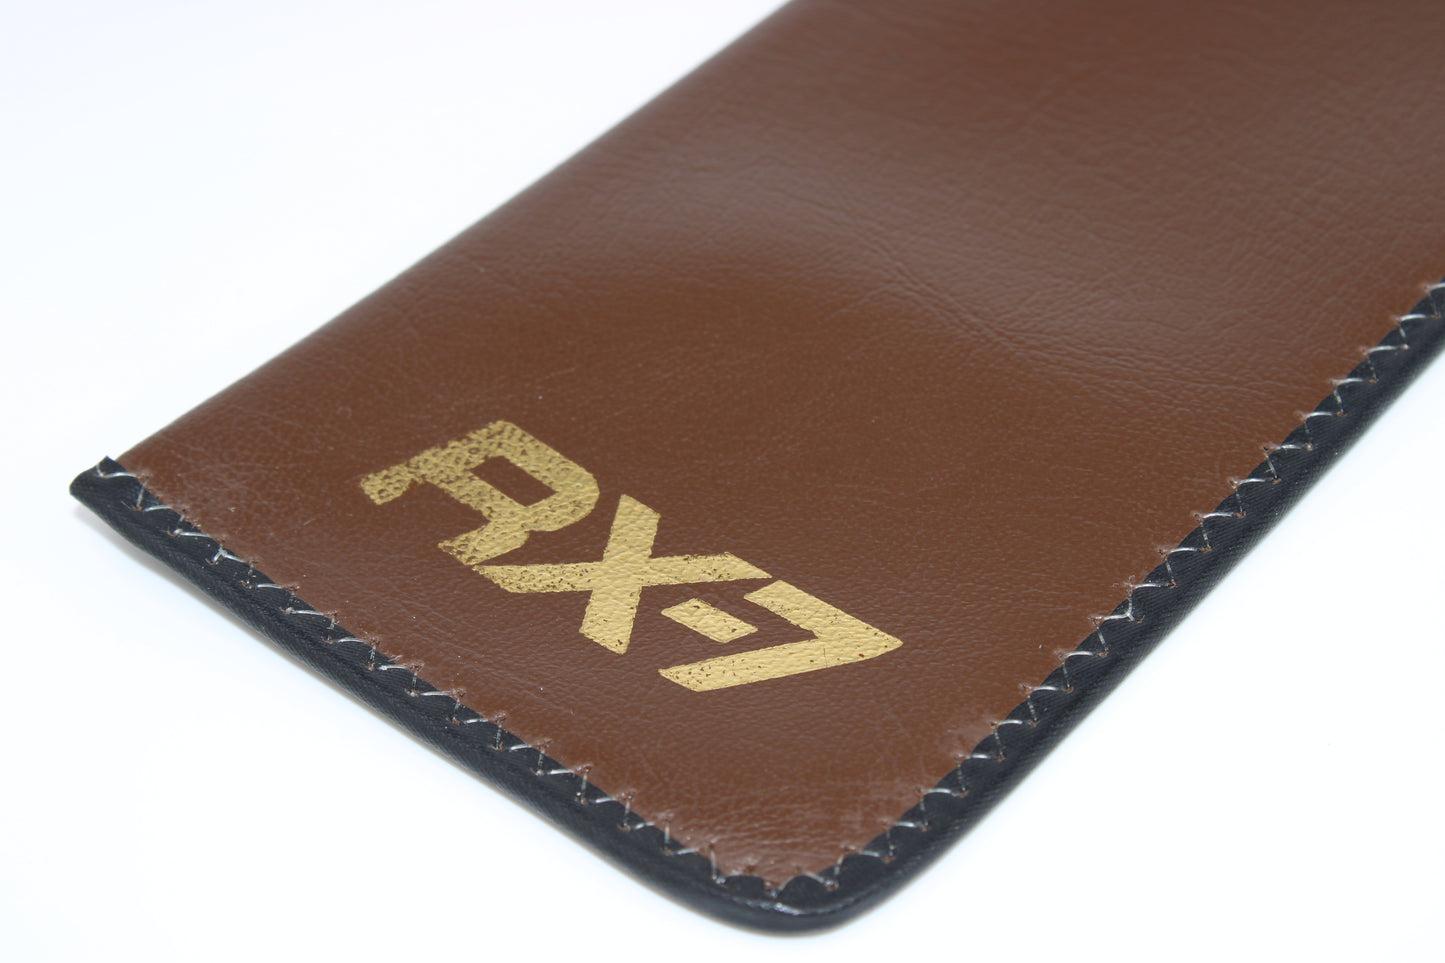 RX-7 Leather Glasses Case